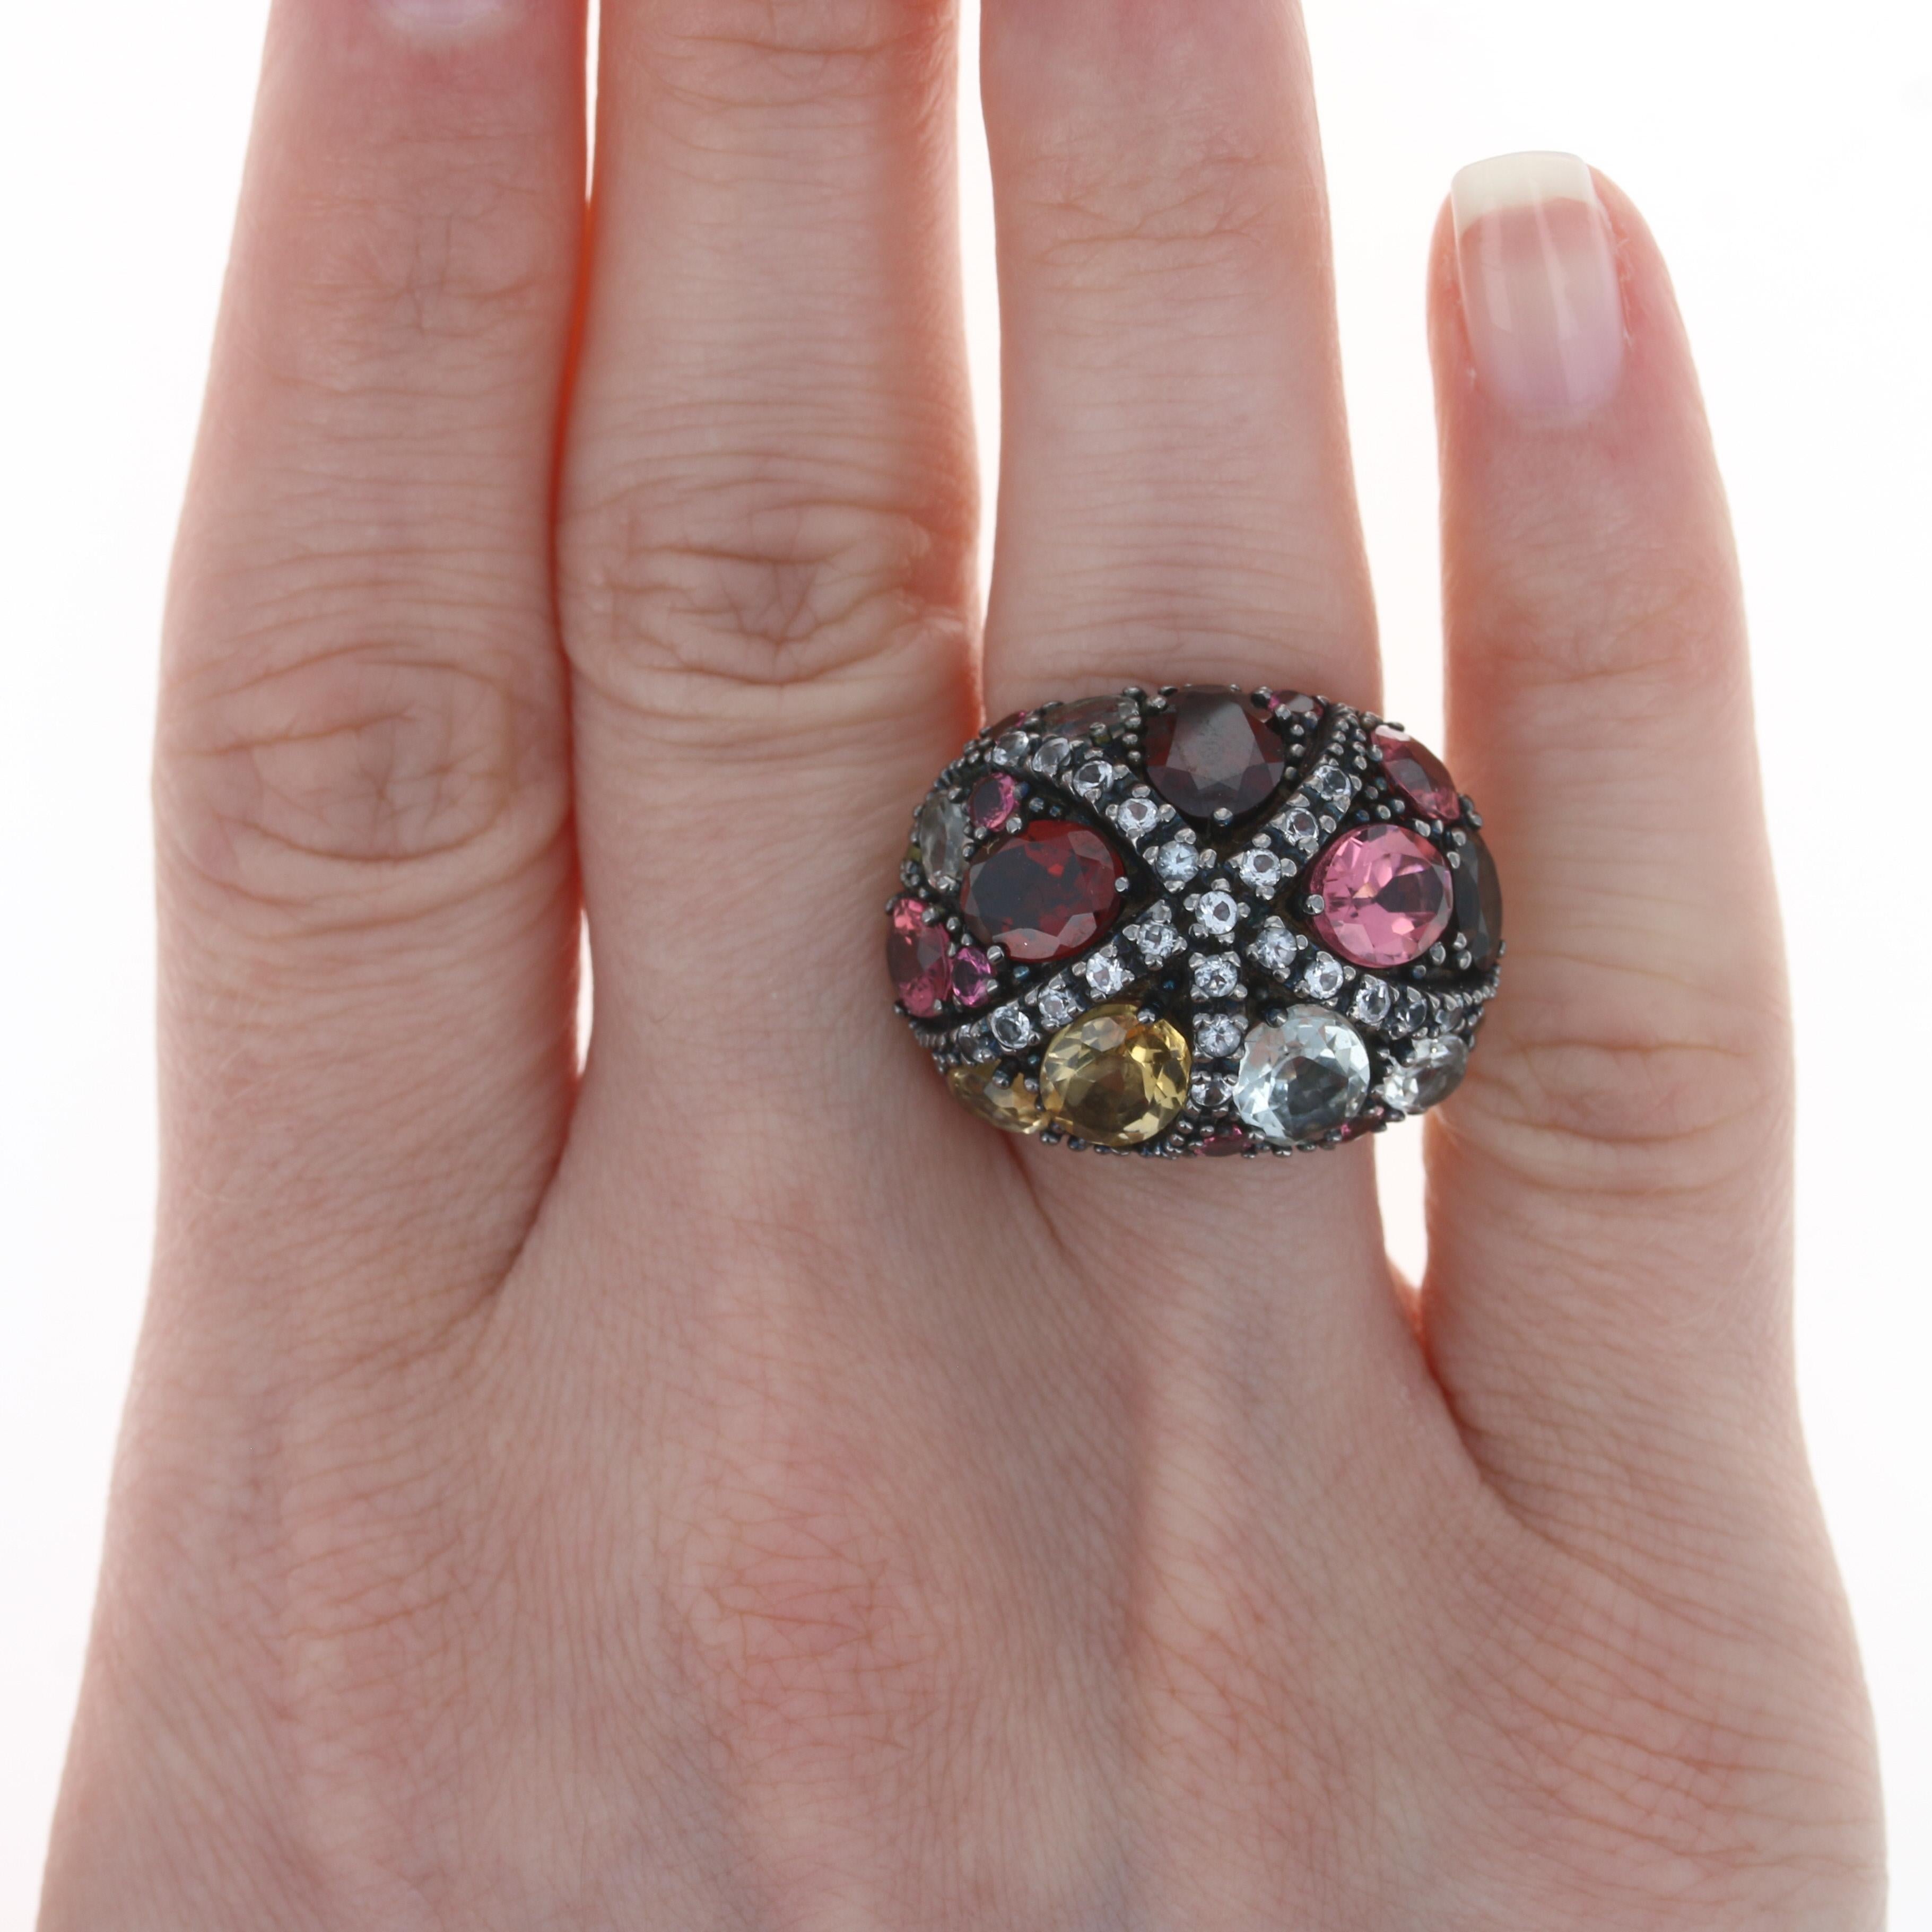 Retail Price: $1,847.50

Size: 6 1/2

Brand: Ziba by Le Vian

Metal Content: Sterling Silver

Stone Information
Genuine Tourmalines
Cuts: Oval & Round 
Color: Pink

Genuine Garnets
Cut: Oval
Color: Red

Genuine Prasiolite Quartz
Cuts: Oval & Round